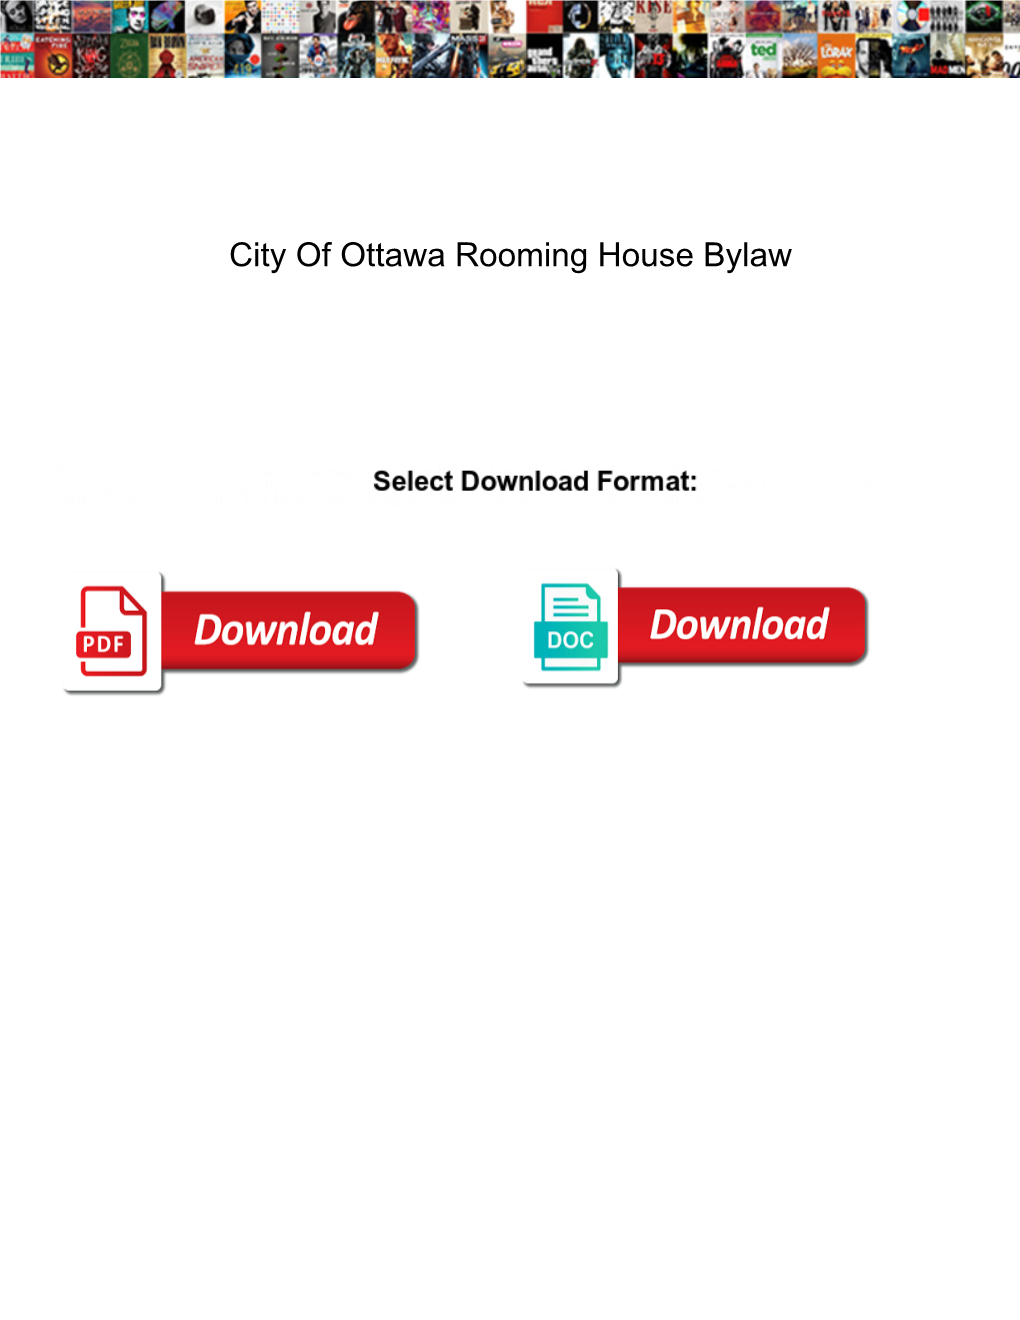 City of Ottawa Rooming House Bylaw